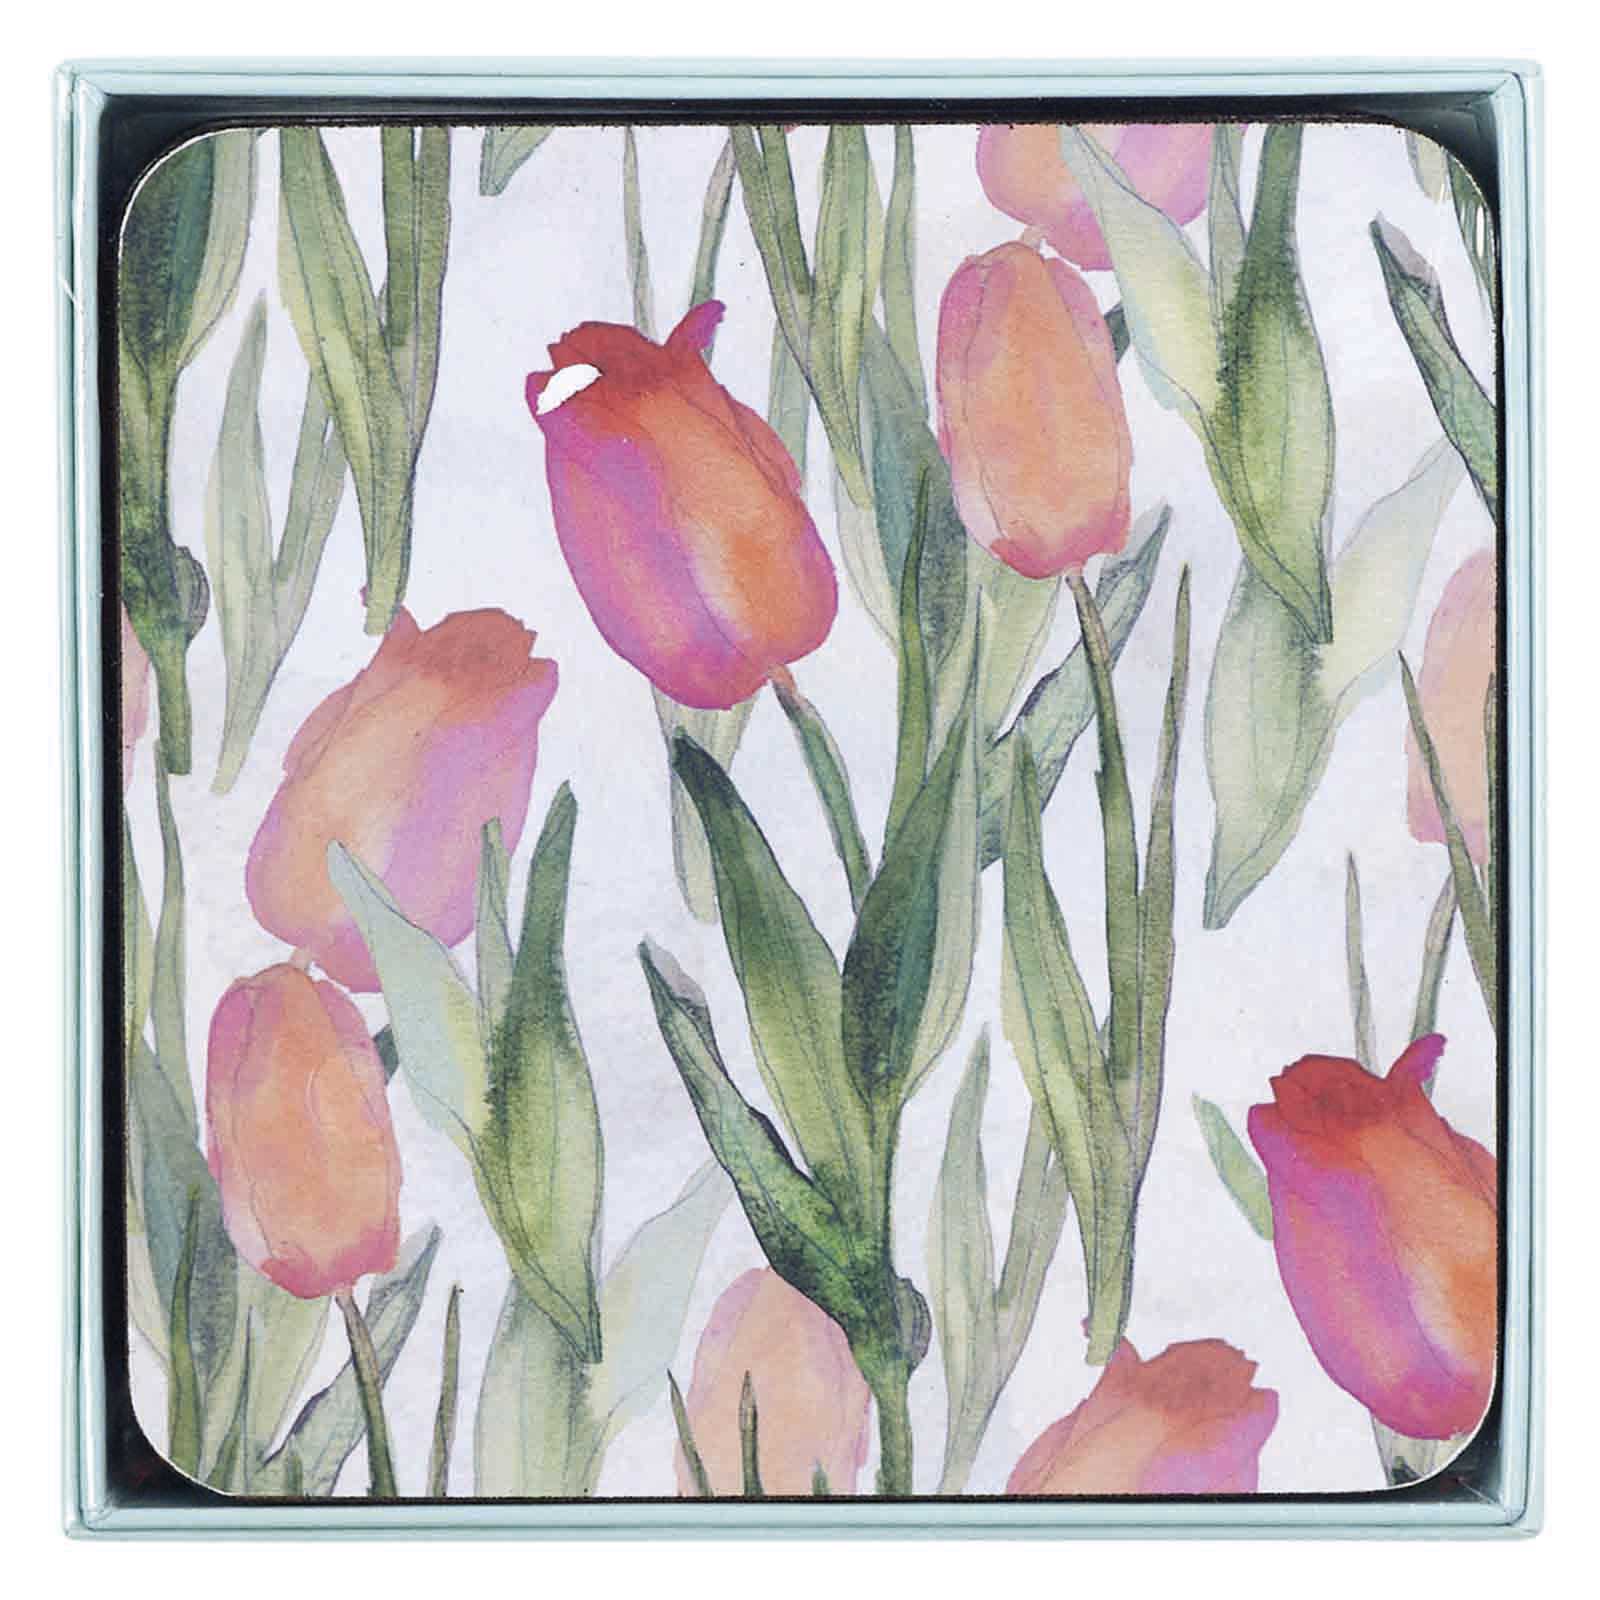 PINK TULIPS Square Coasters, Set of 4